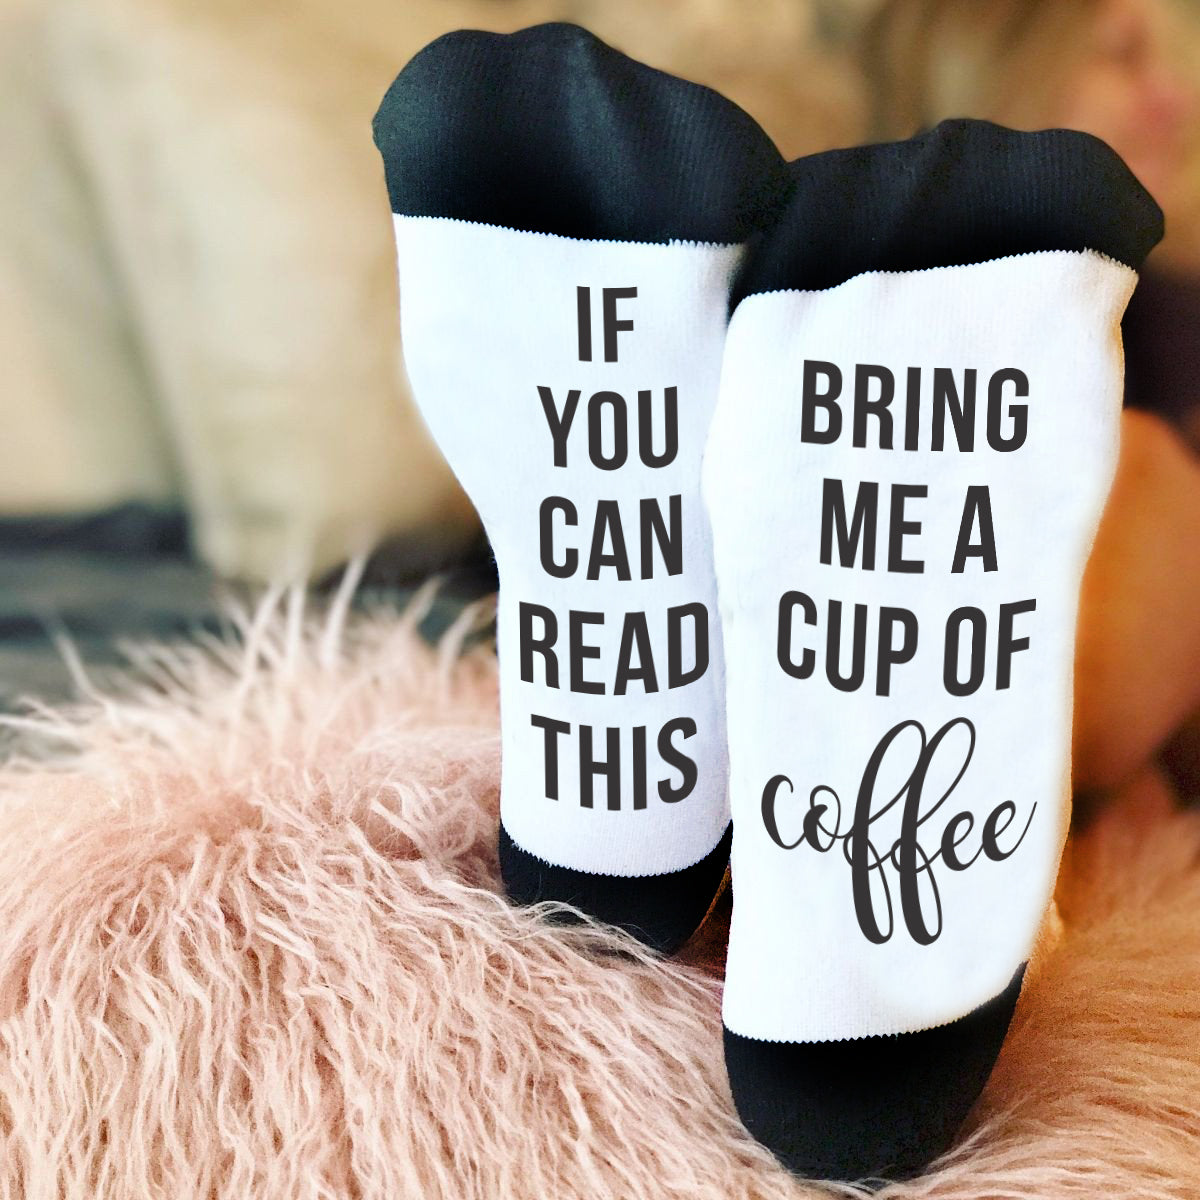 I Drink Coffee For Your Protection Funny Socks – Quirky Crate